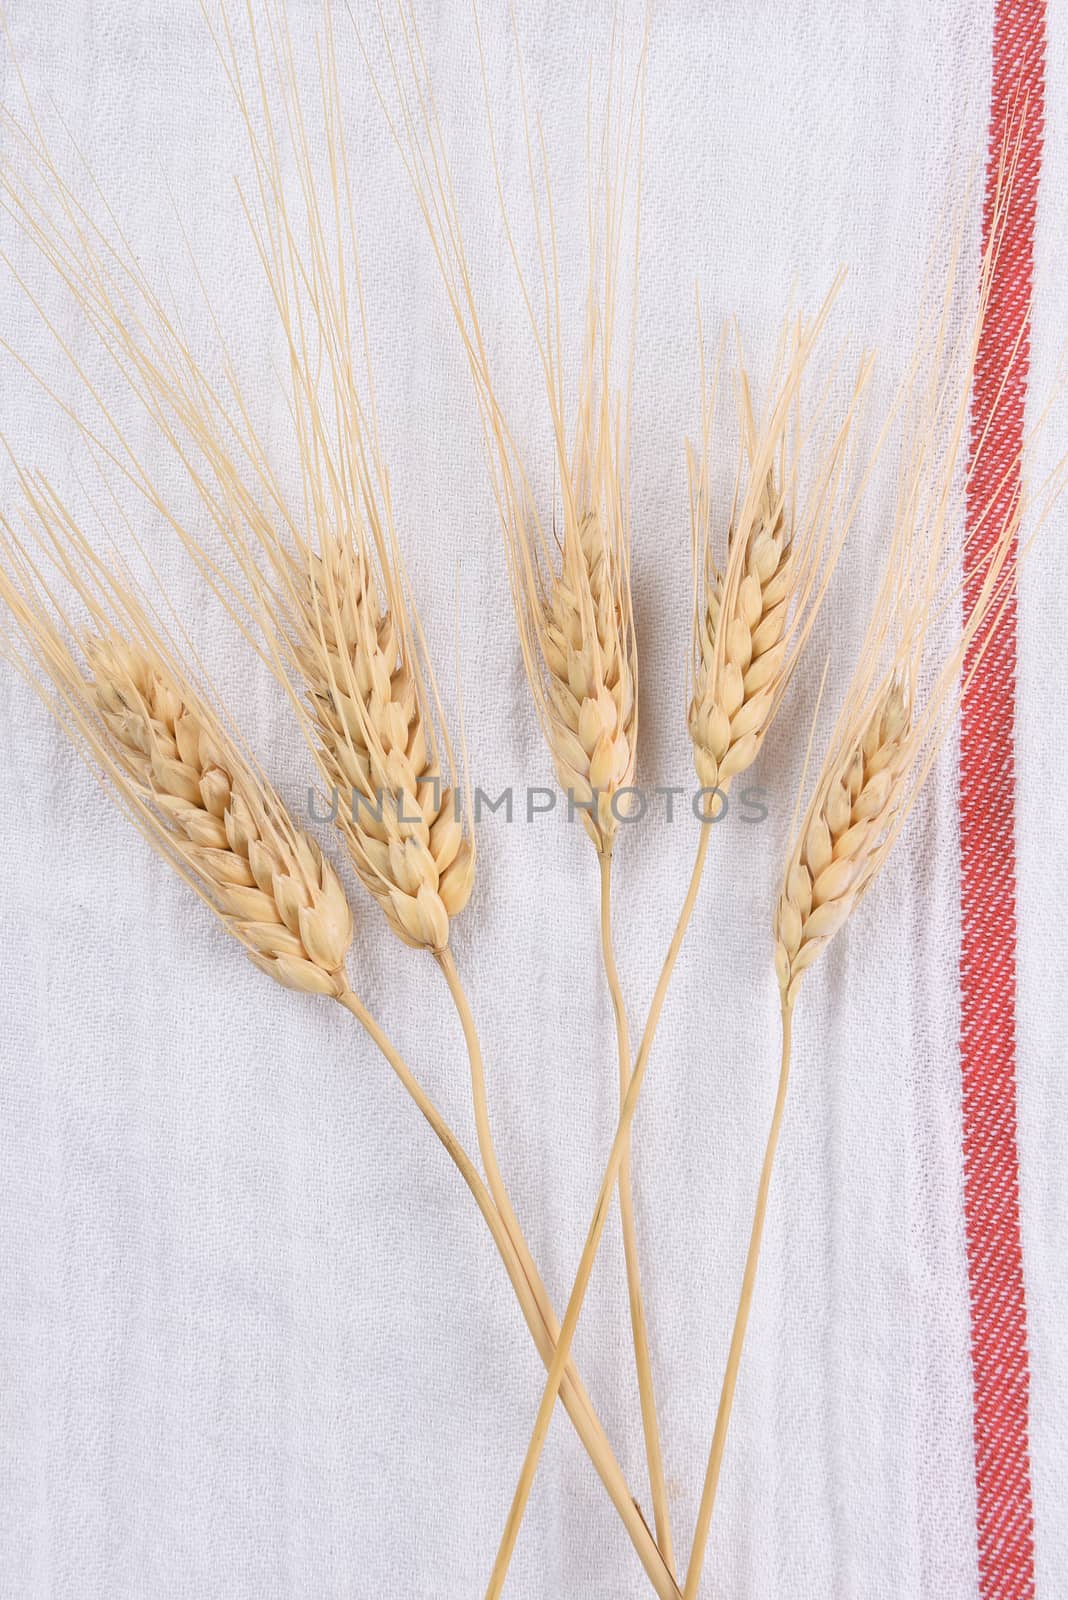 Wheat on White Towel by sCukrov